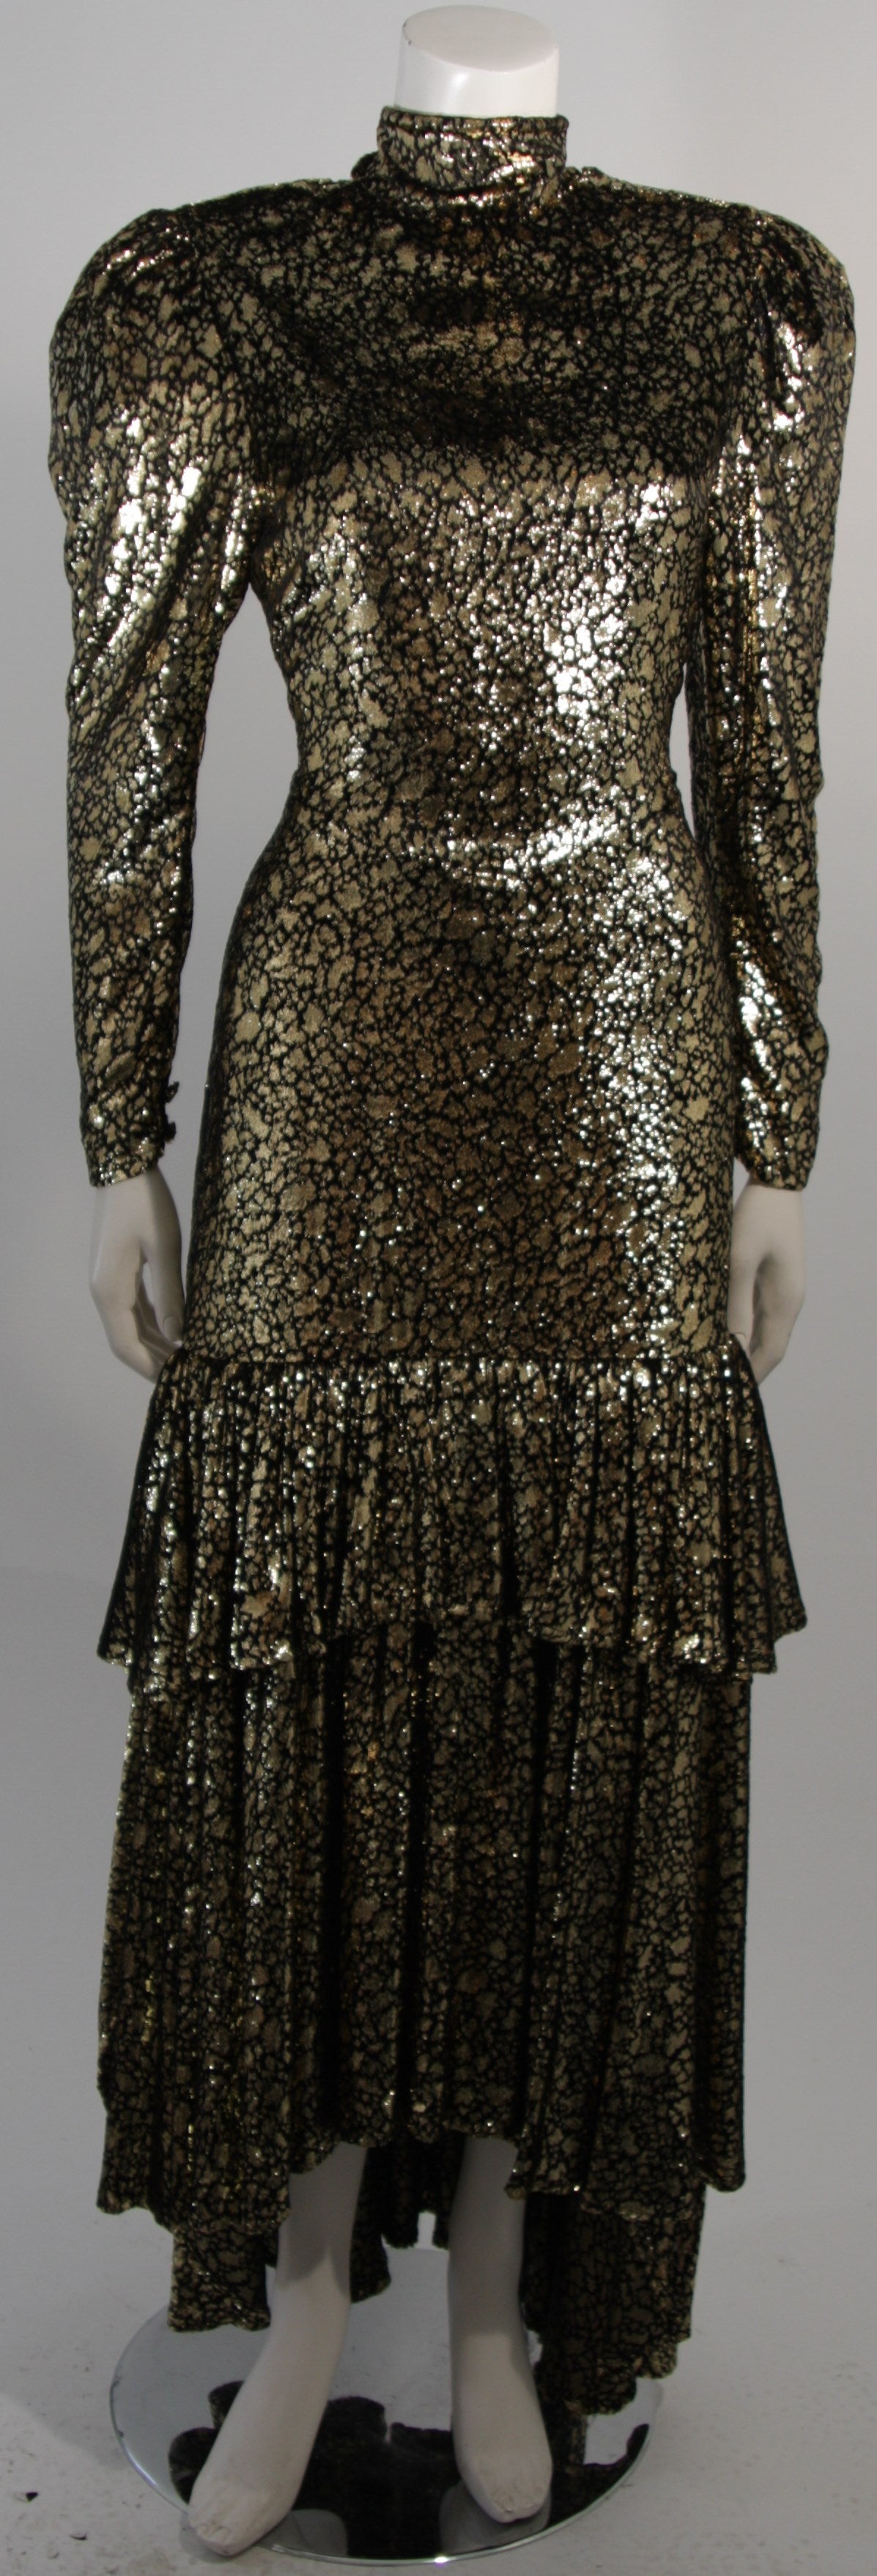 This gown is composed of a black and gold metallic fabric with the properties of velvet. There are long sleeve with gathers at the shoulders and a tiered skirt. There is a center back zipper closure for ease of access. In excellent condition, comes